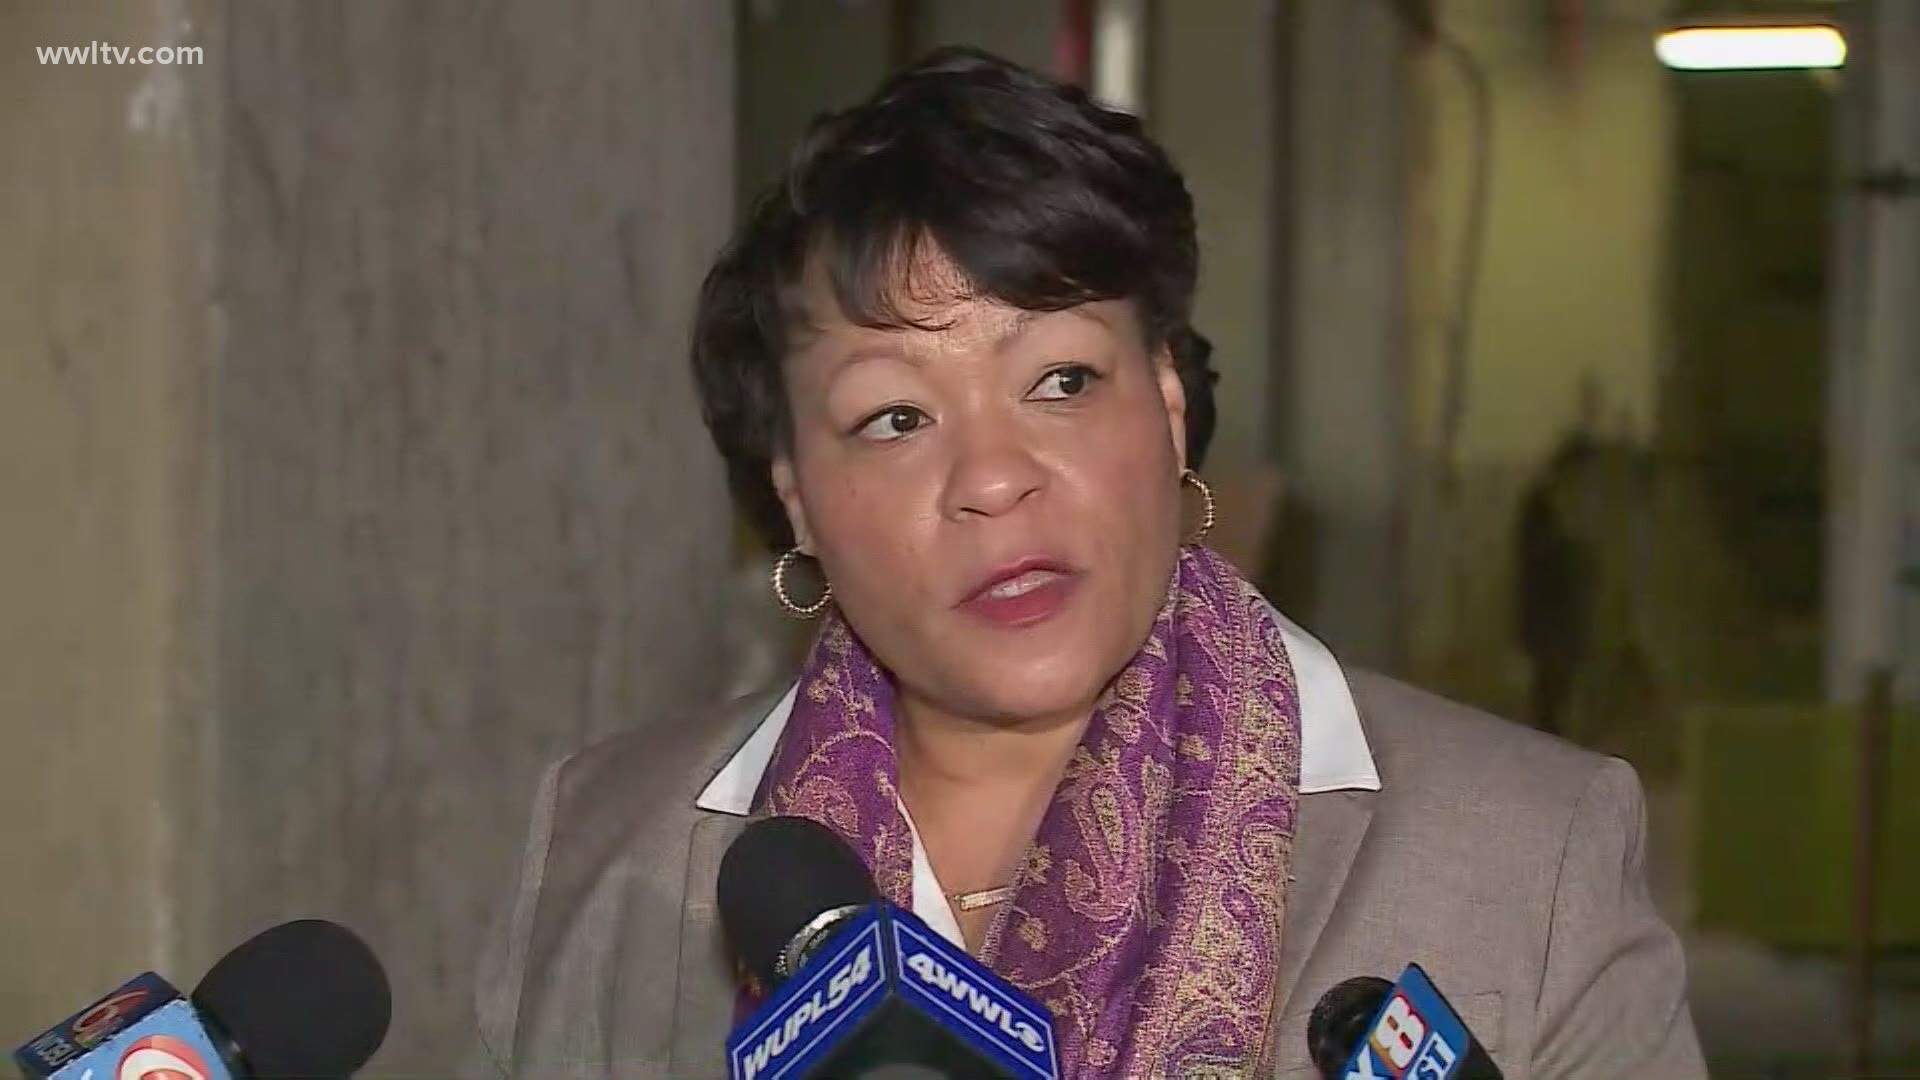 Mayor Cantrell said she will announce the official safety guidelines on Friday, Feb. 5.